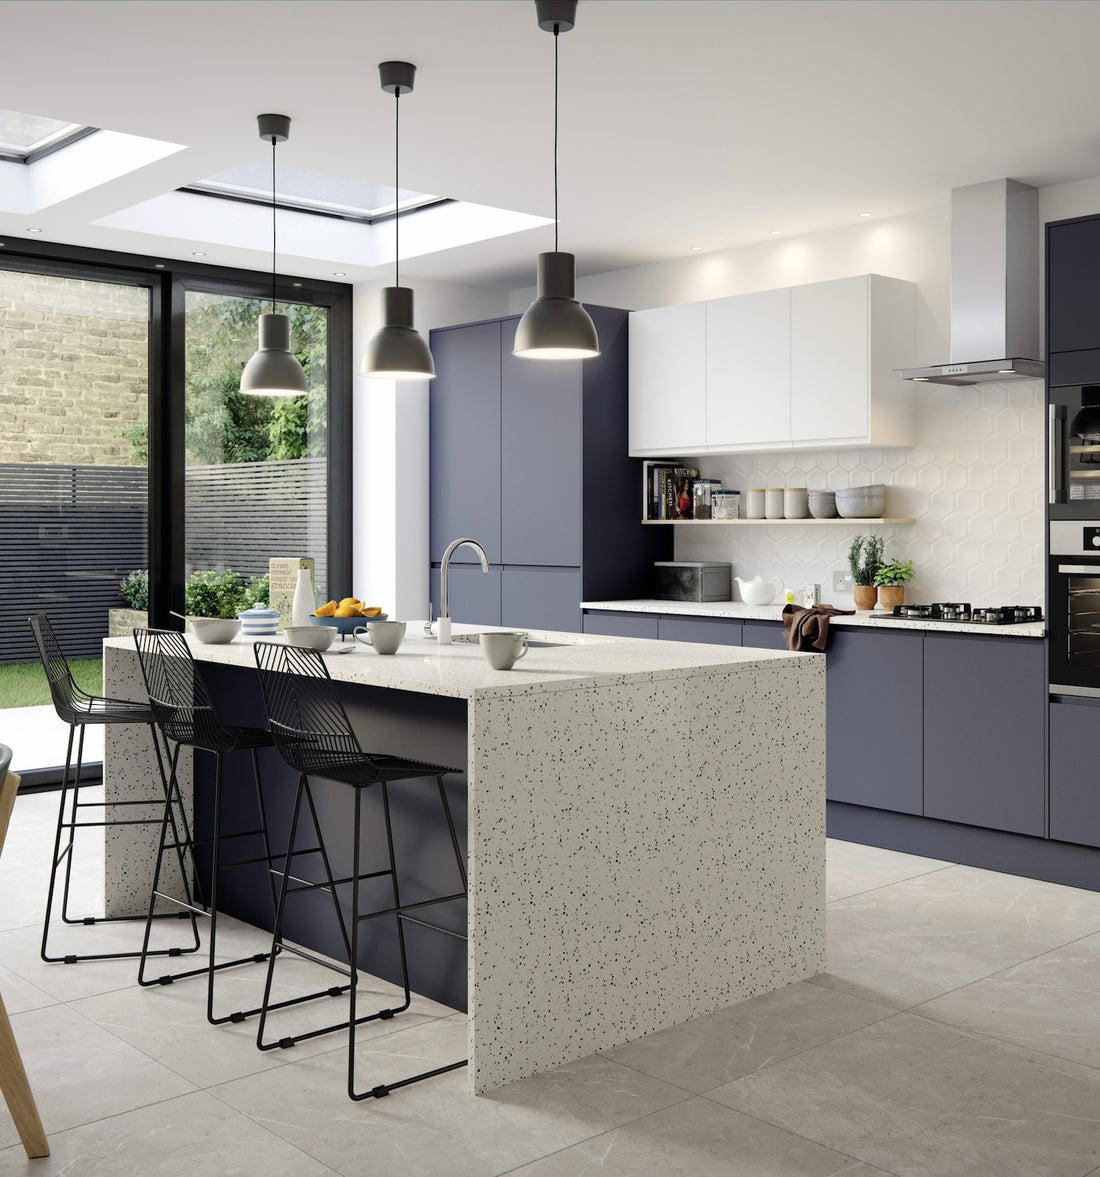 The True Function of a Kitchen Worktop And an Island